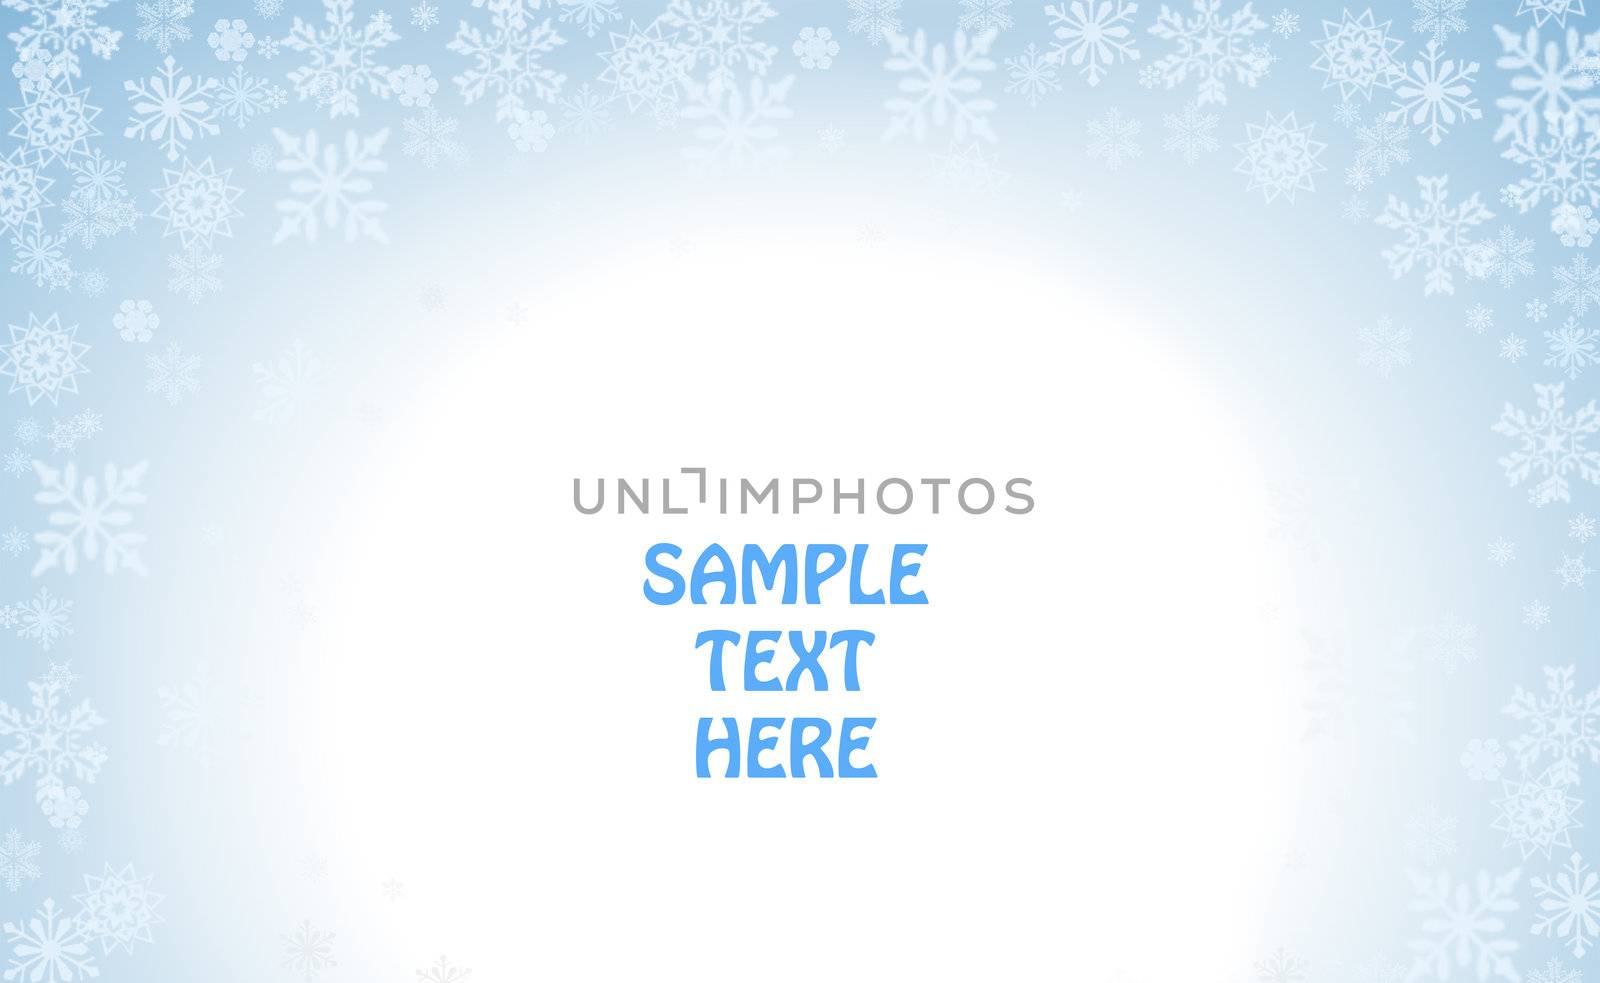 Blue and white snowy winter holiday template